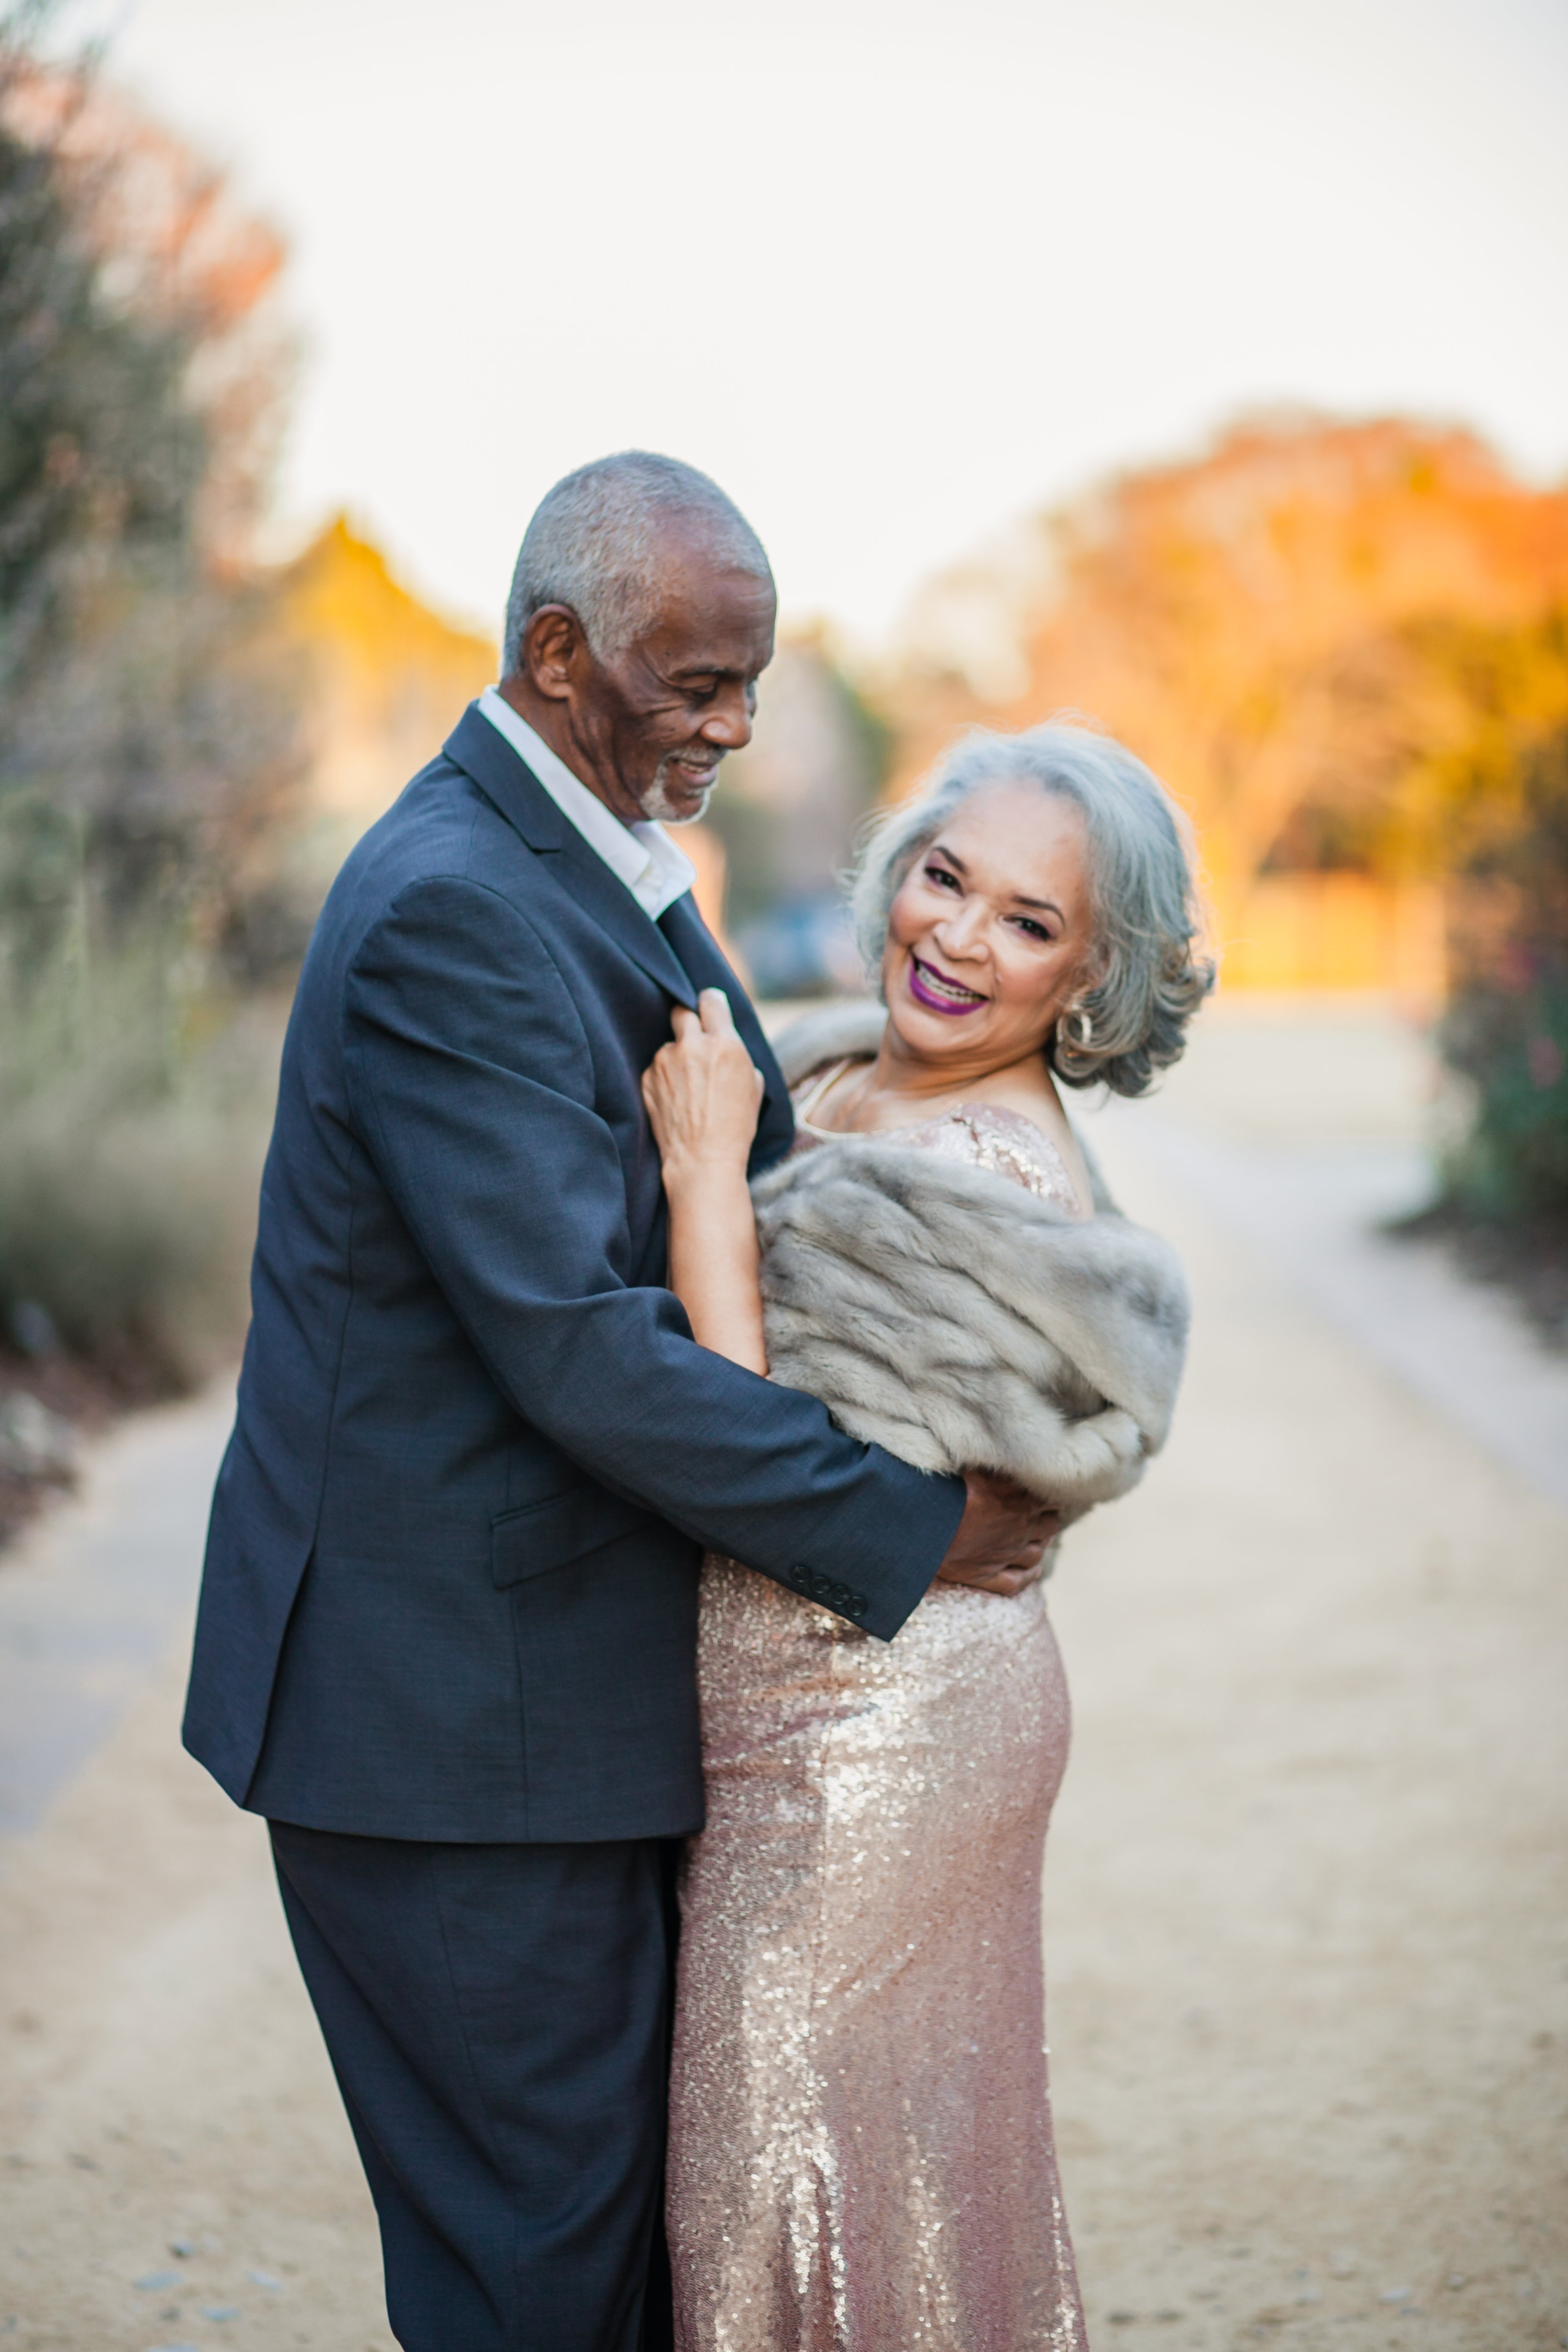 Married For 47 Years, This Couple Beat Cancer Twice and Now Their Story ...